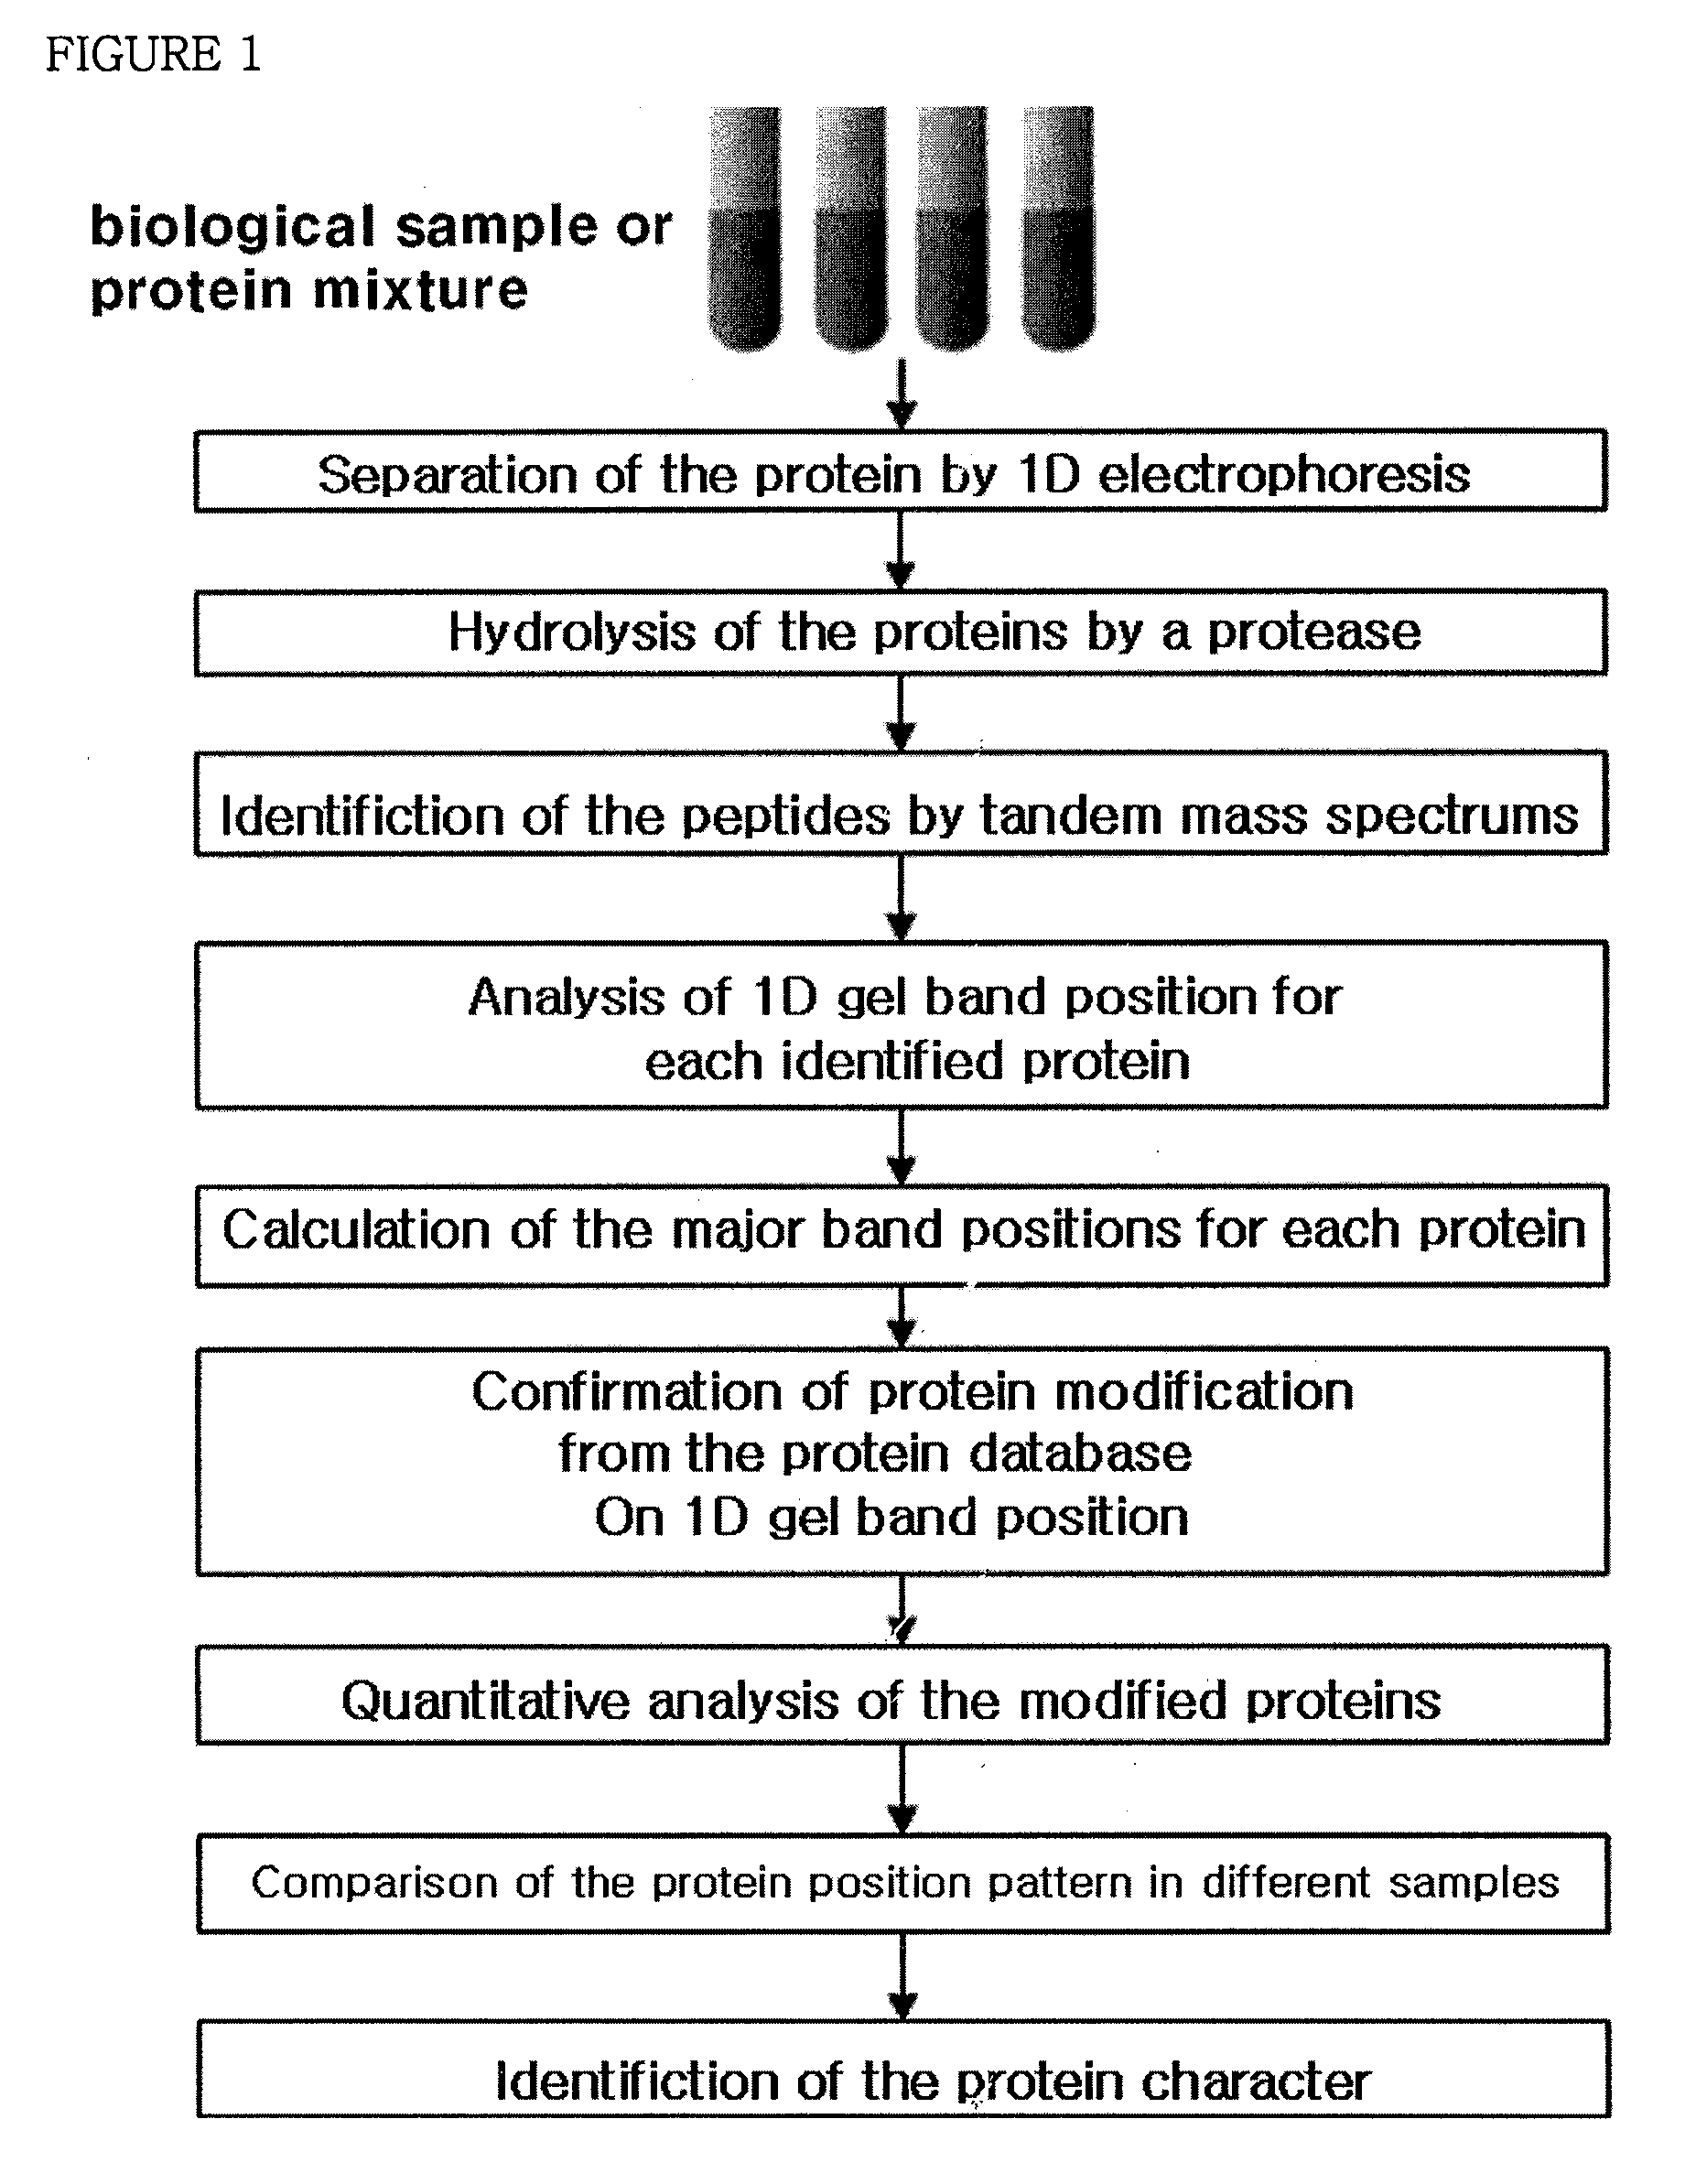 System of analyzing protein modification with its band position of one-dimensional gel by the mass spectral data analysis and the method of analyzing protein modification using thereof